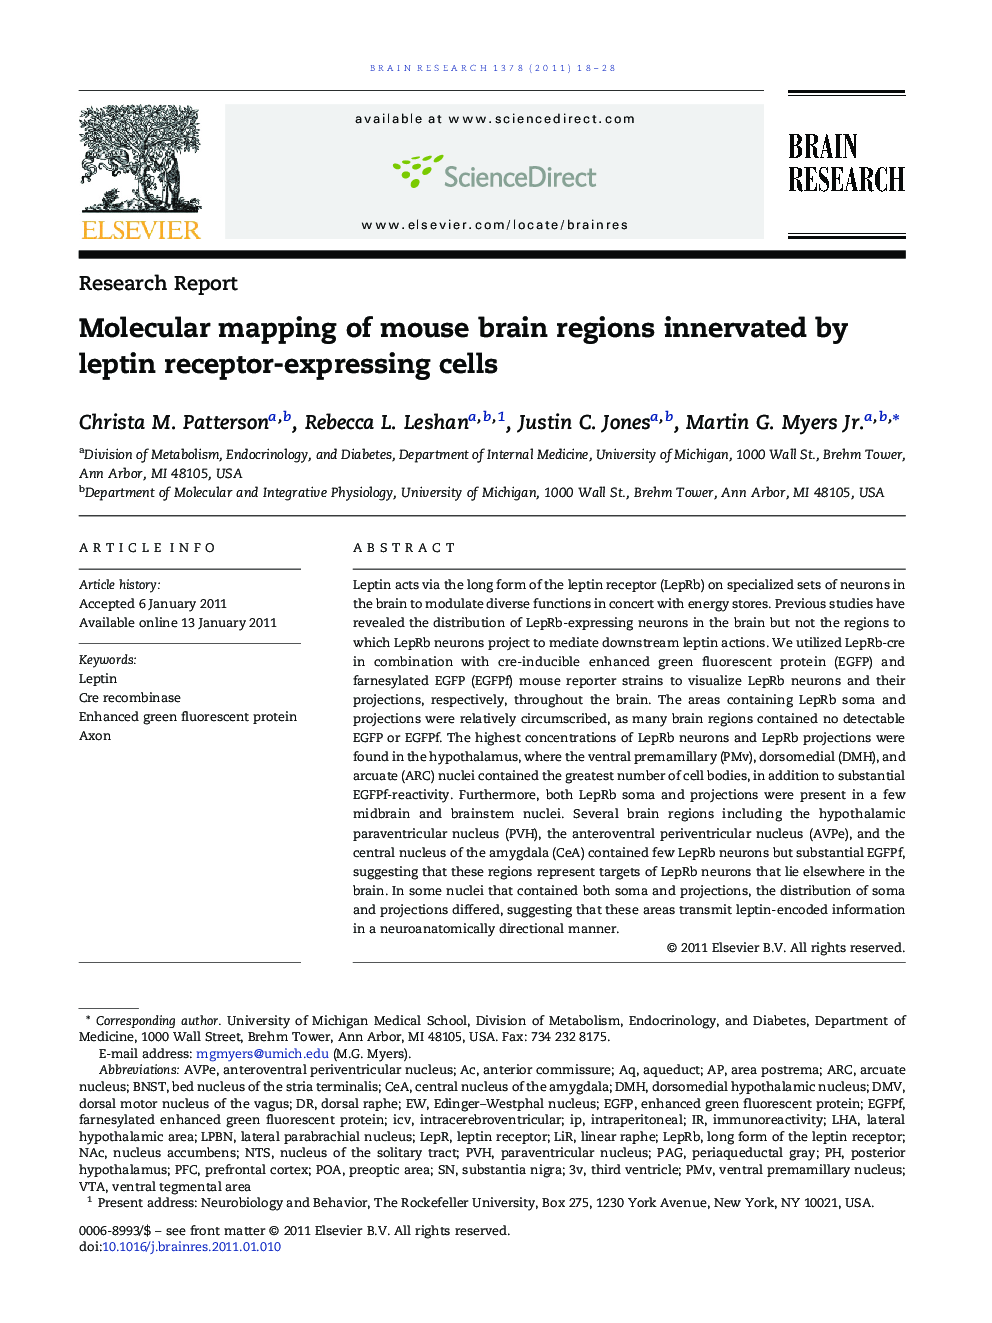 Molecular mapping of mouse brain regions innervated by leptin receptor-expressing cells